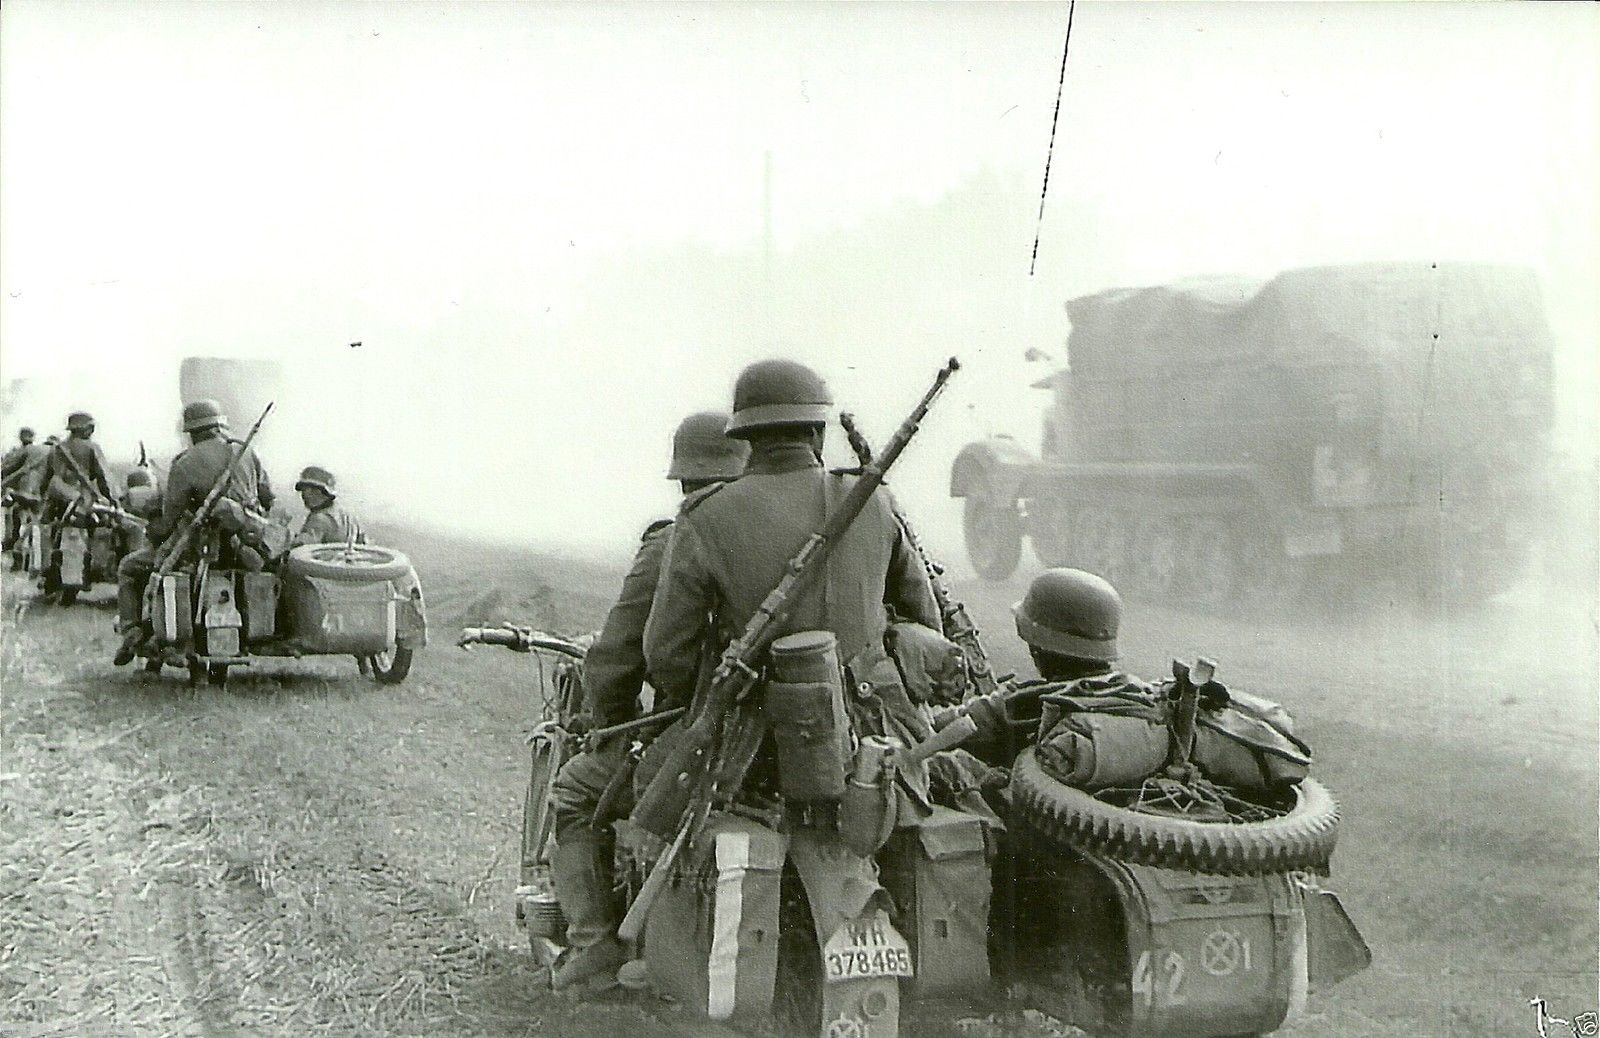 BMW R75 carried troops and cargo on all kinds of terrain.